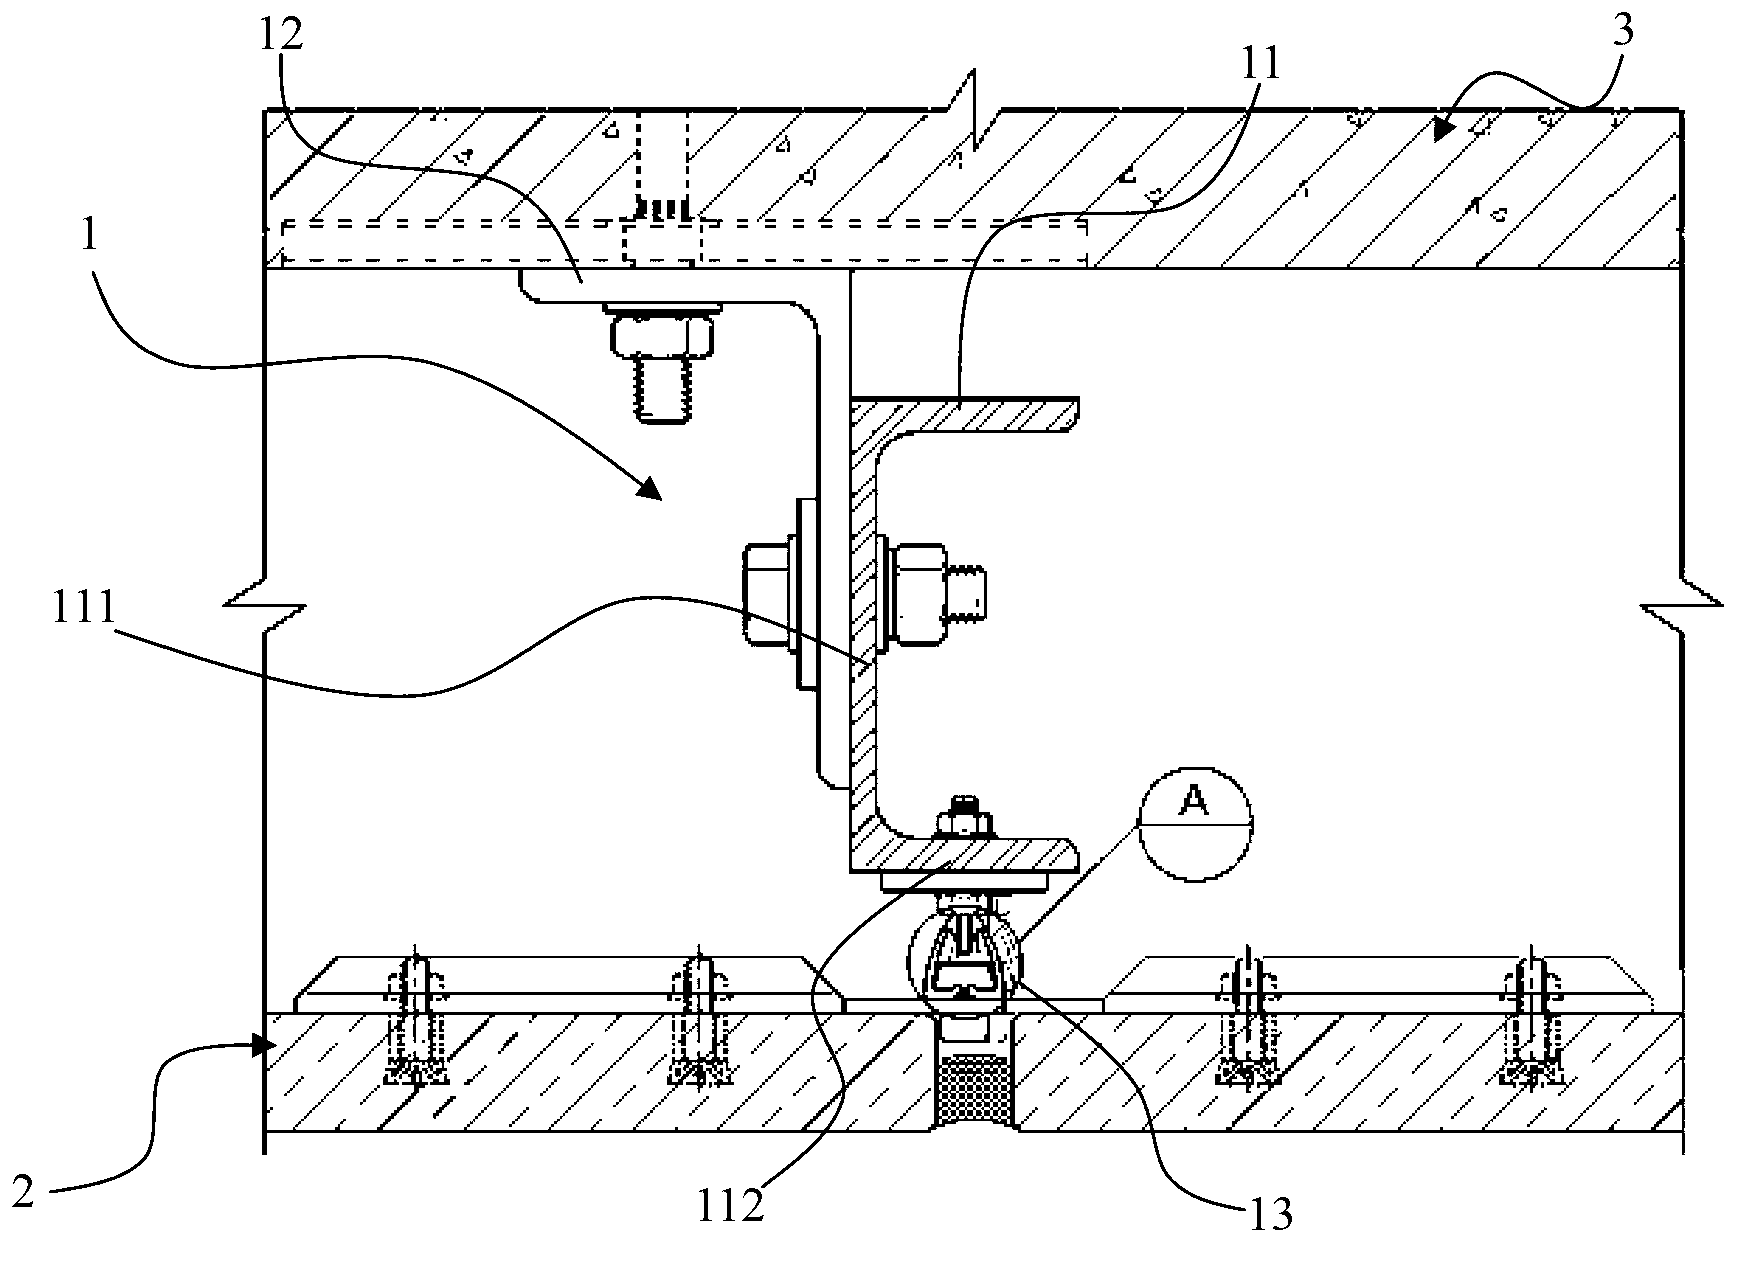 Structure for mounting stone and method for mounting stone